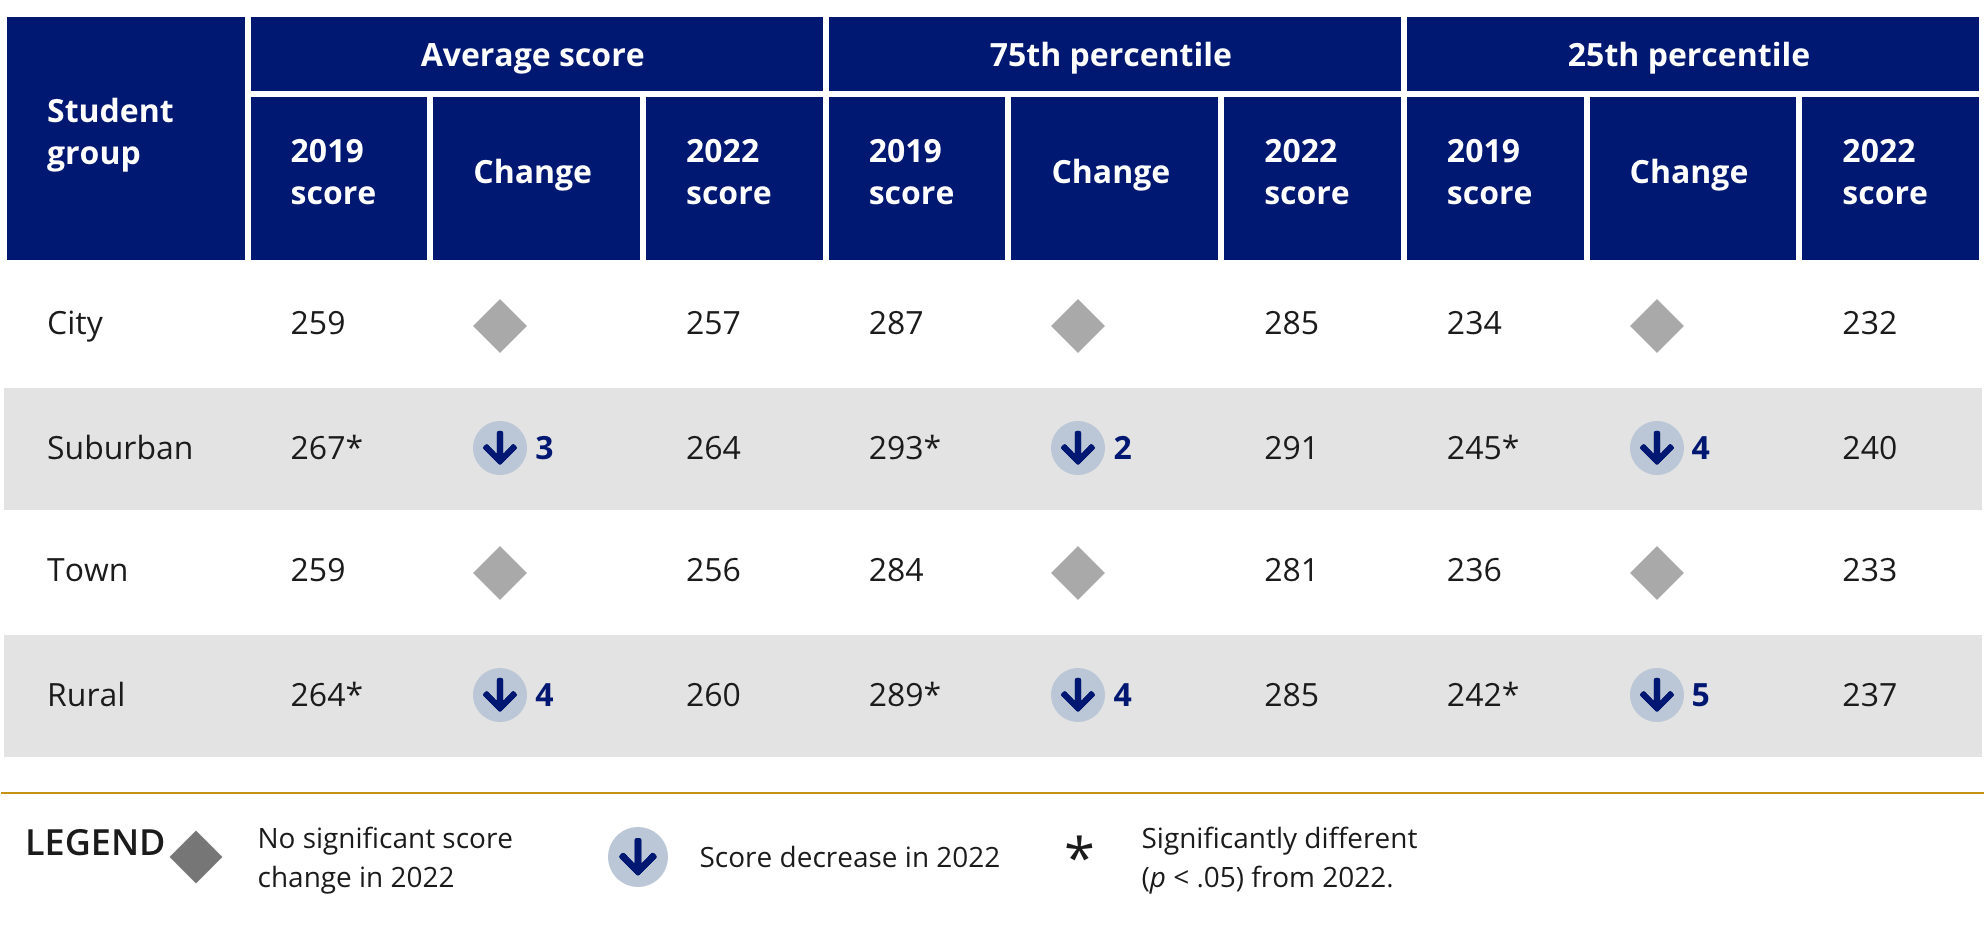 Changes in Eighth-Grade NAEP Reading Scores Between 2019 and 2022, by School Location